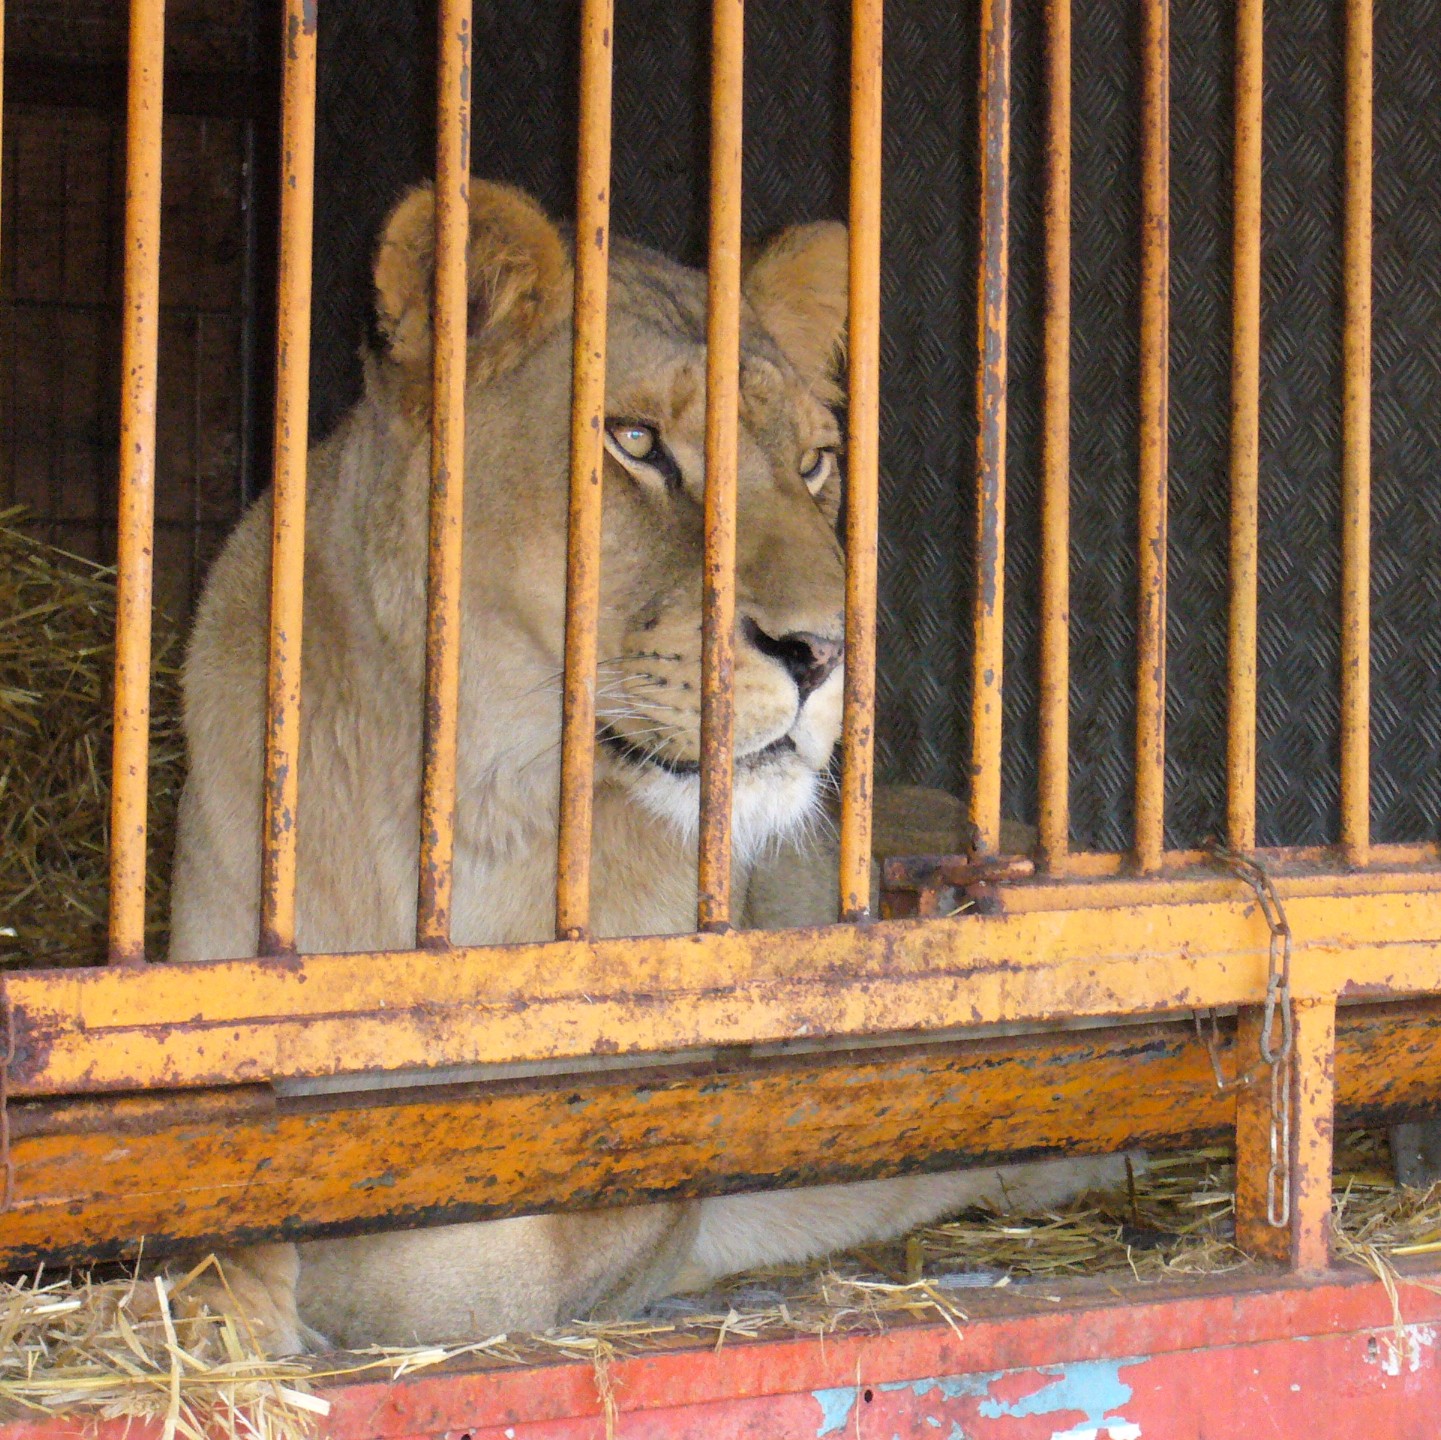 WALES BANS WILD ANIMALS IN CIRCUSES: BORN FREE REACTION